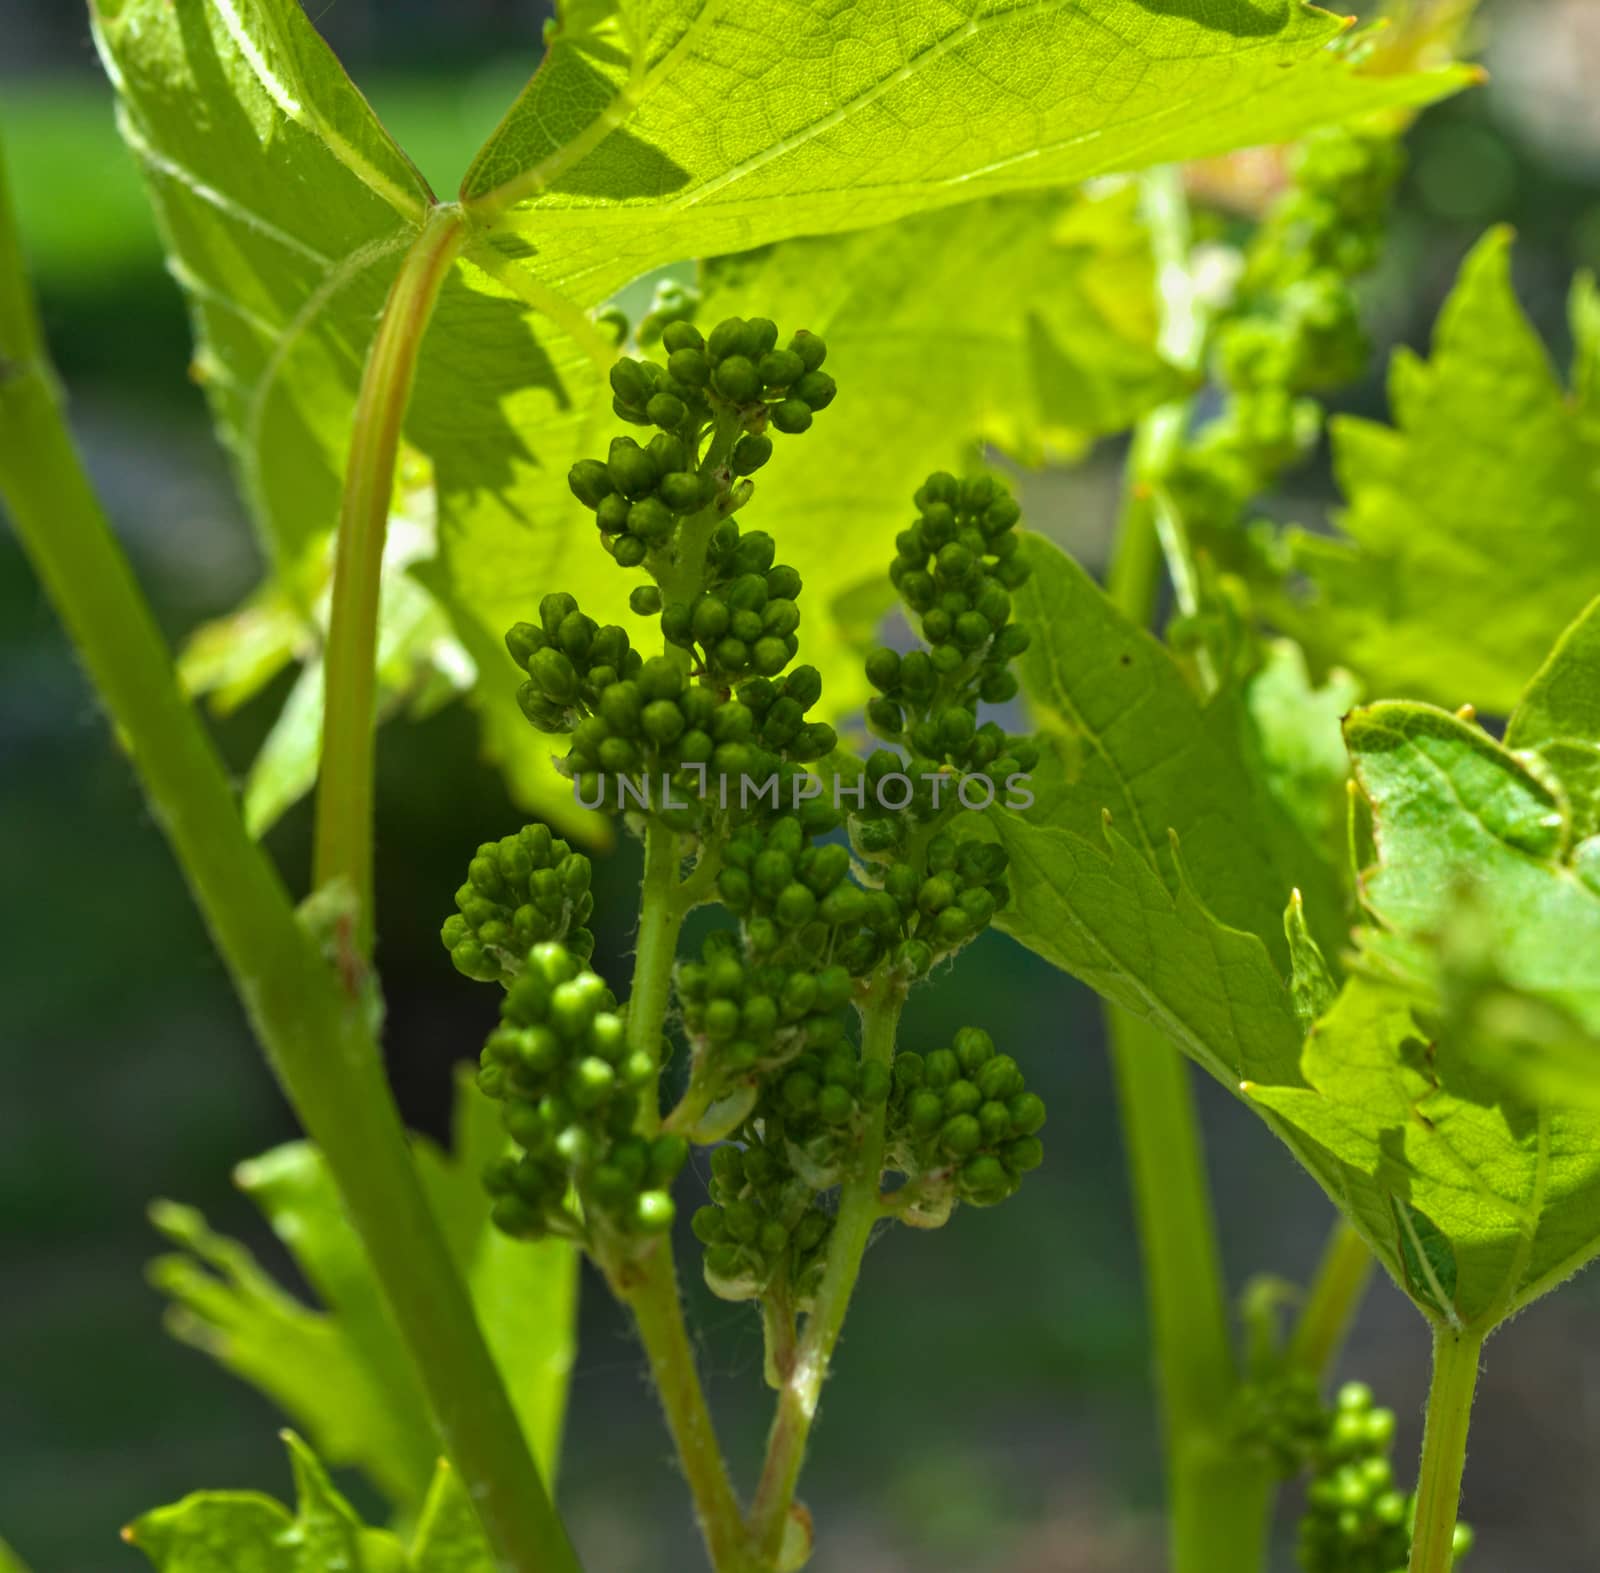 Small grapes growing on grapevine, close up